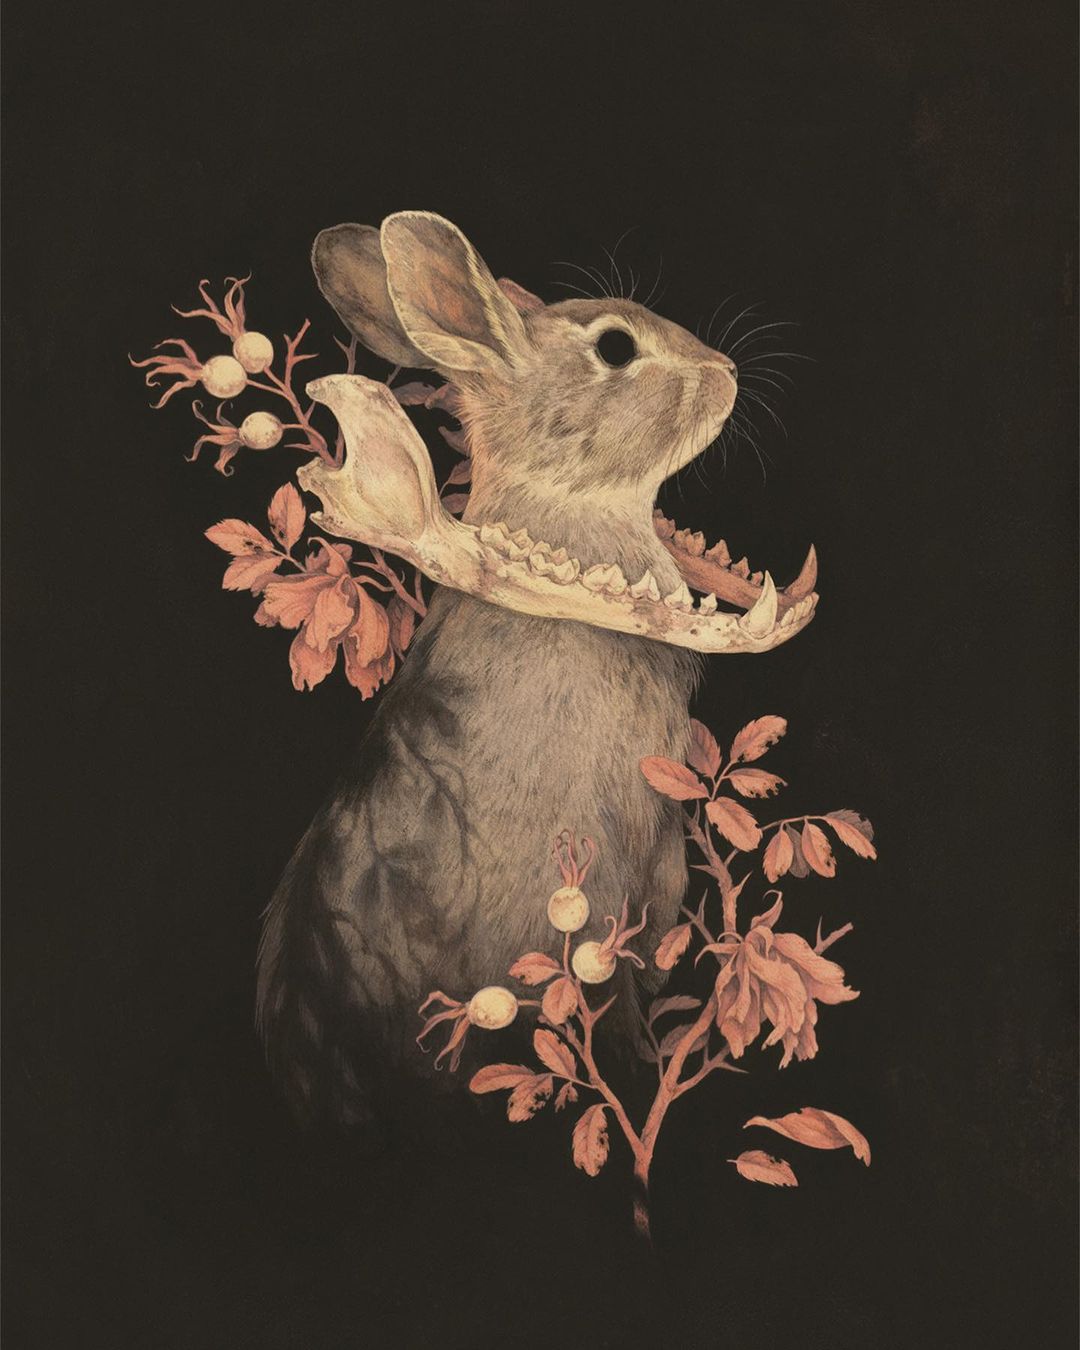 Sublime Flora And Fauna Illustrative Paintings By Teagan White 3